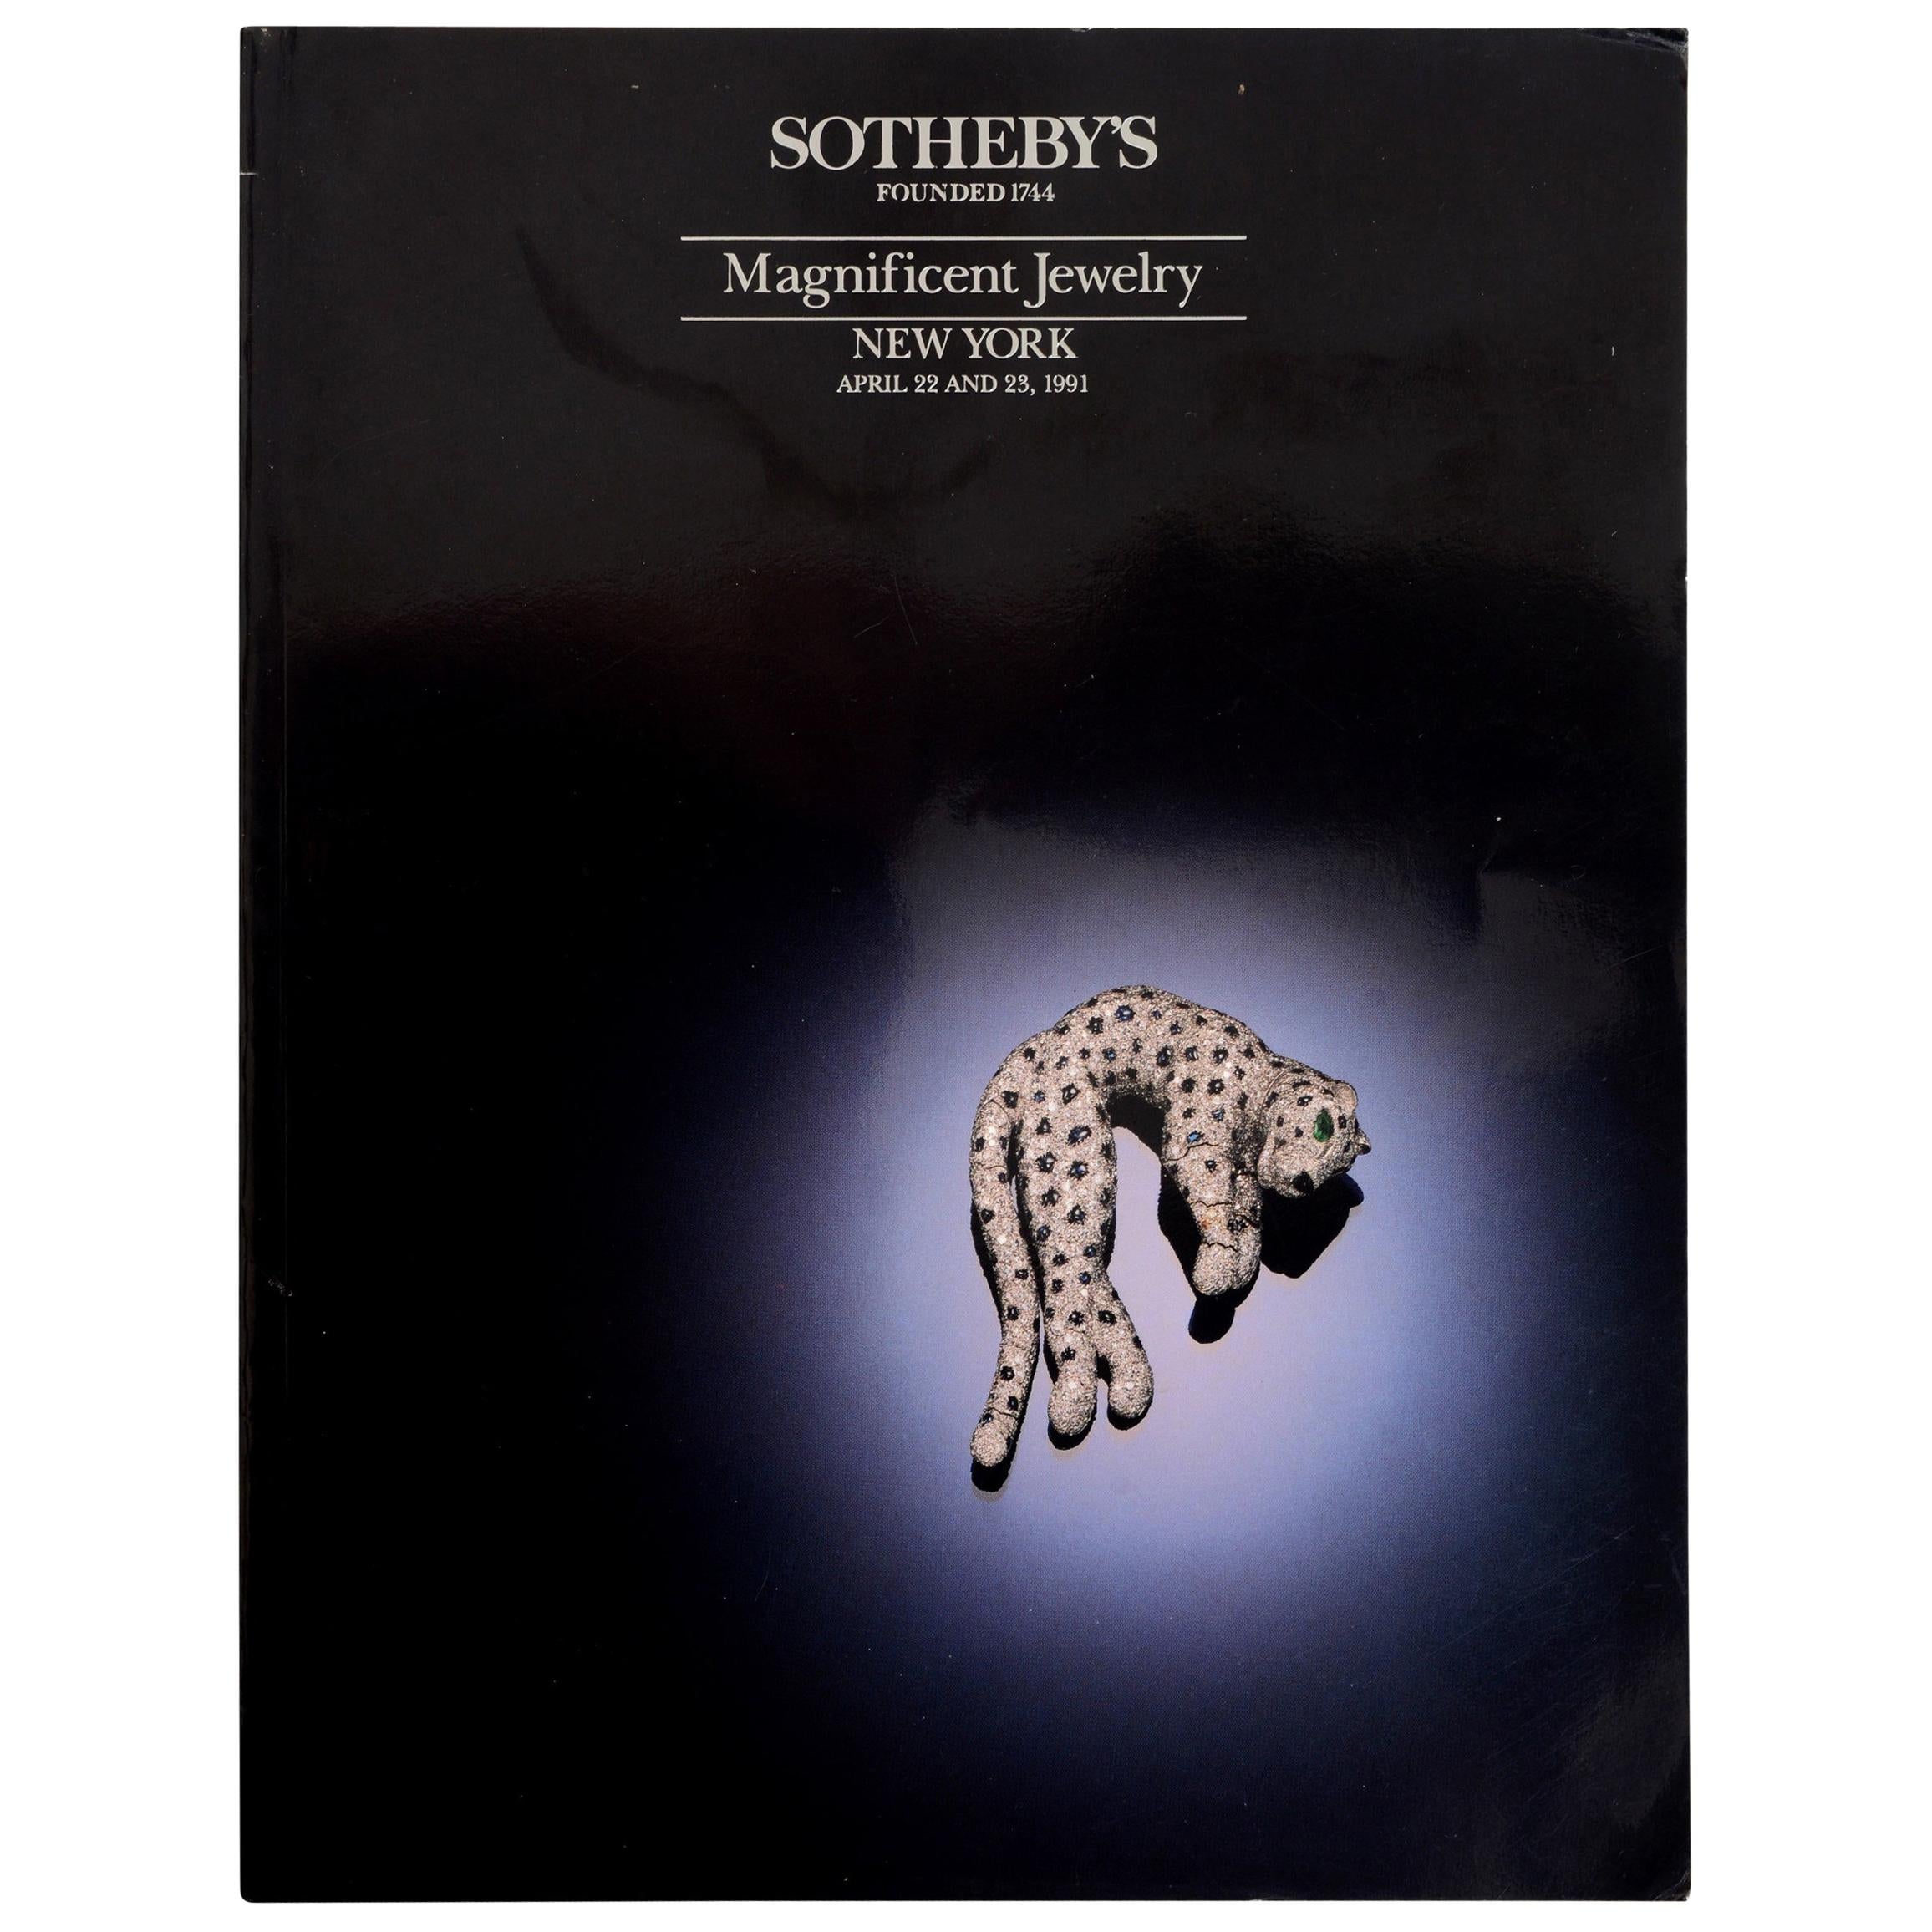 Magnificent Jewelry, New York, April 22-23, 1991, Sotheby's Sale # 6163